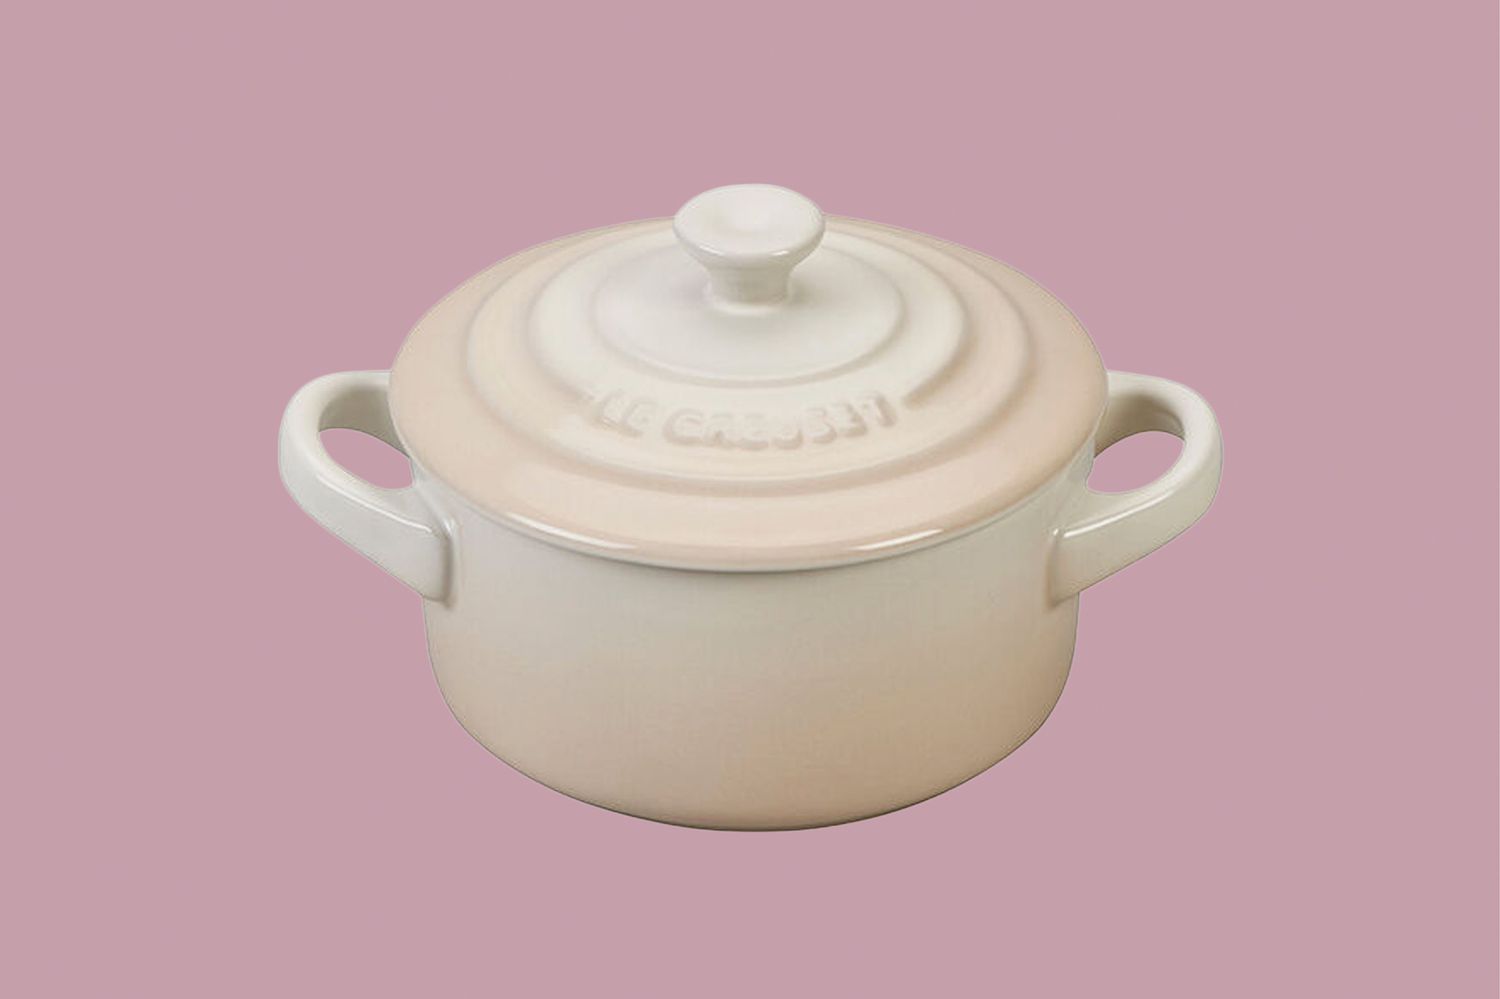 Le Creuset Mini Round Cocotte on background